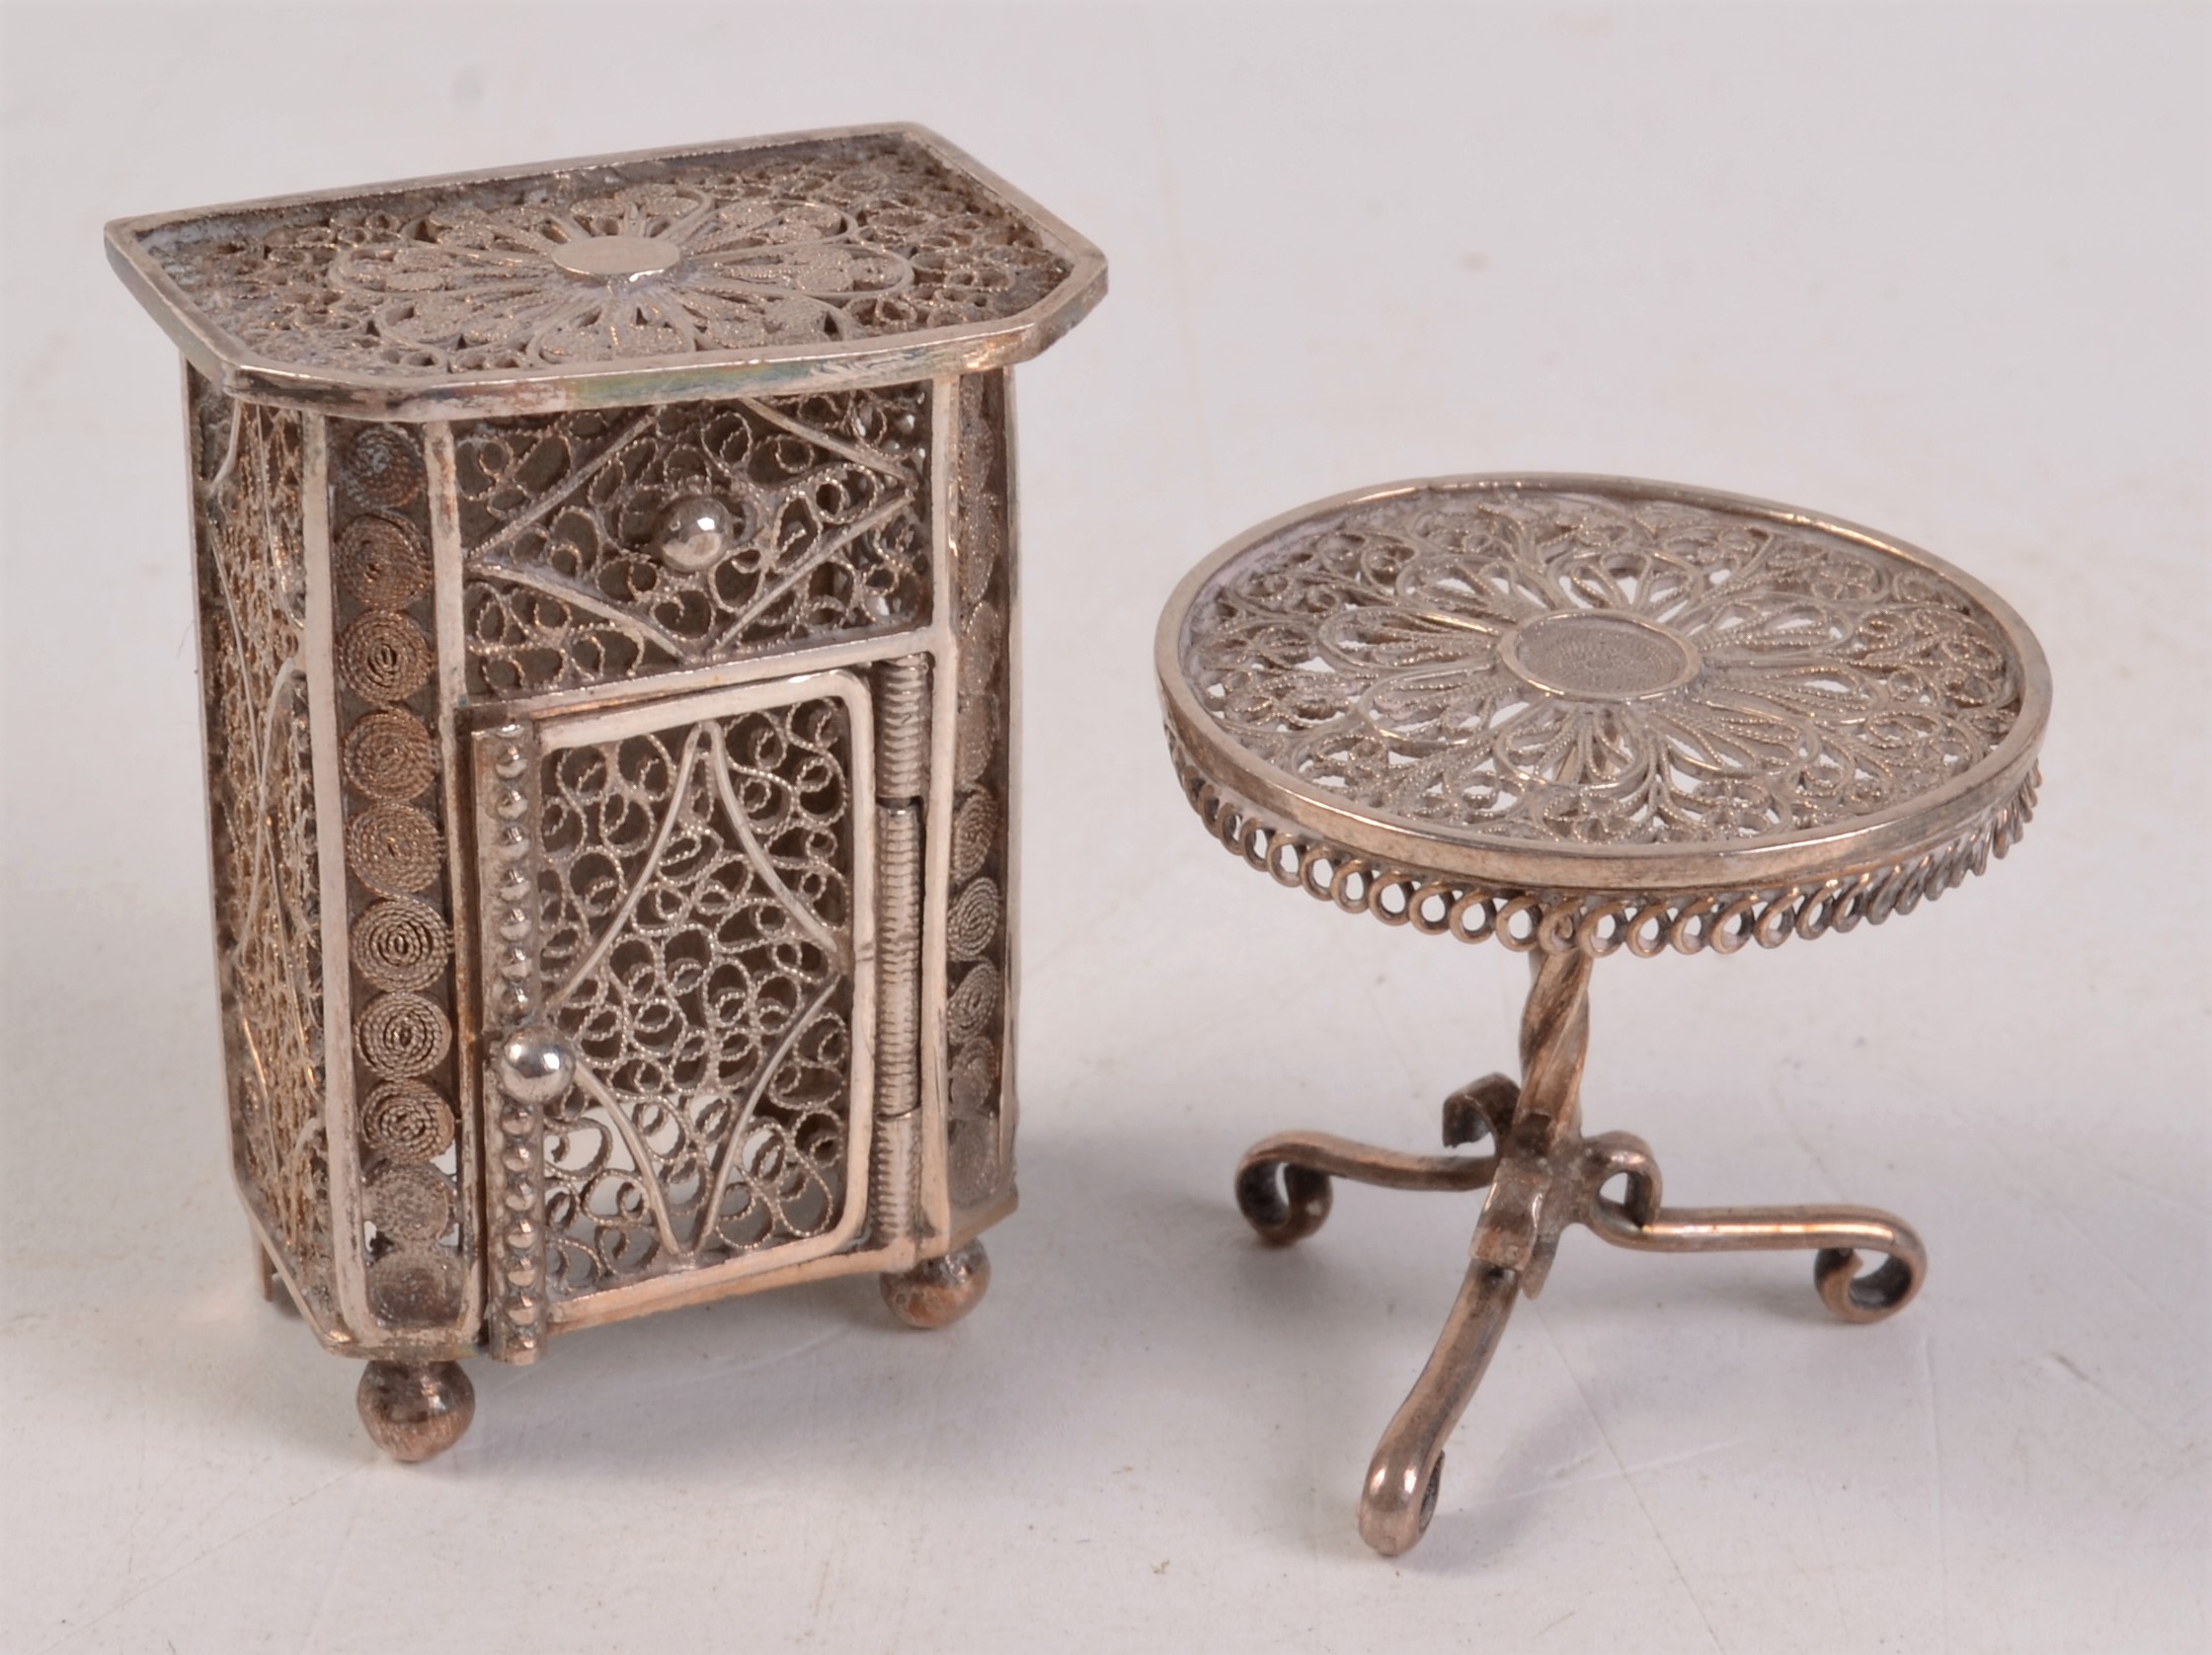 A 19th century miniature silver filigree tripod table and a similar cabinet.